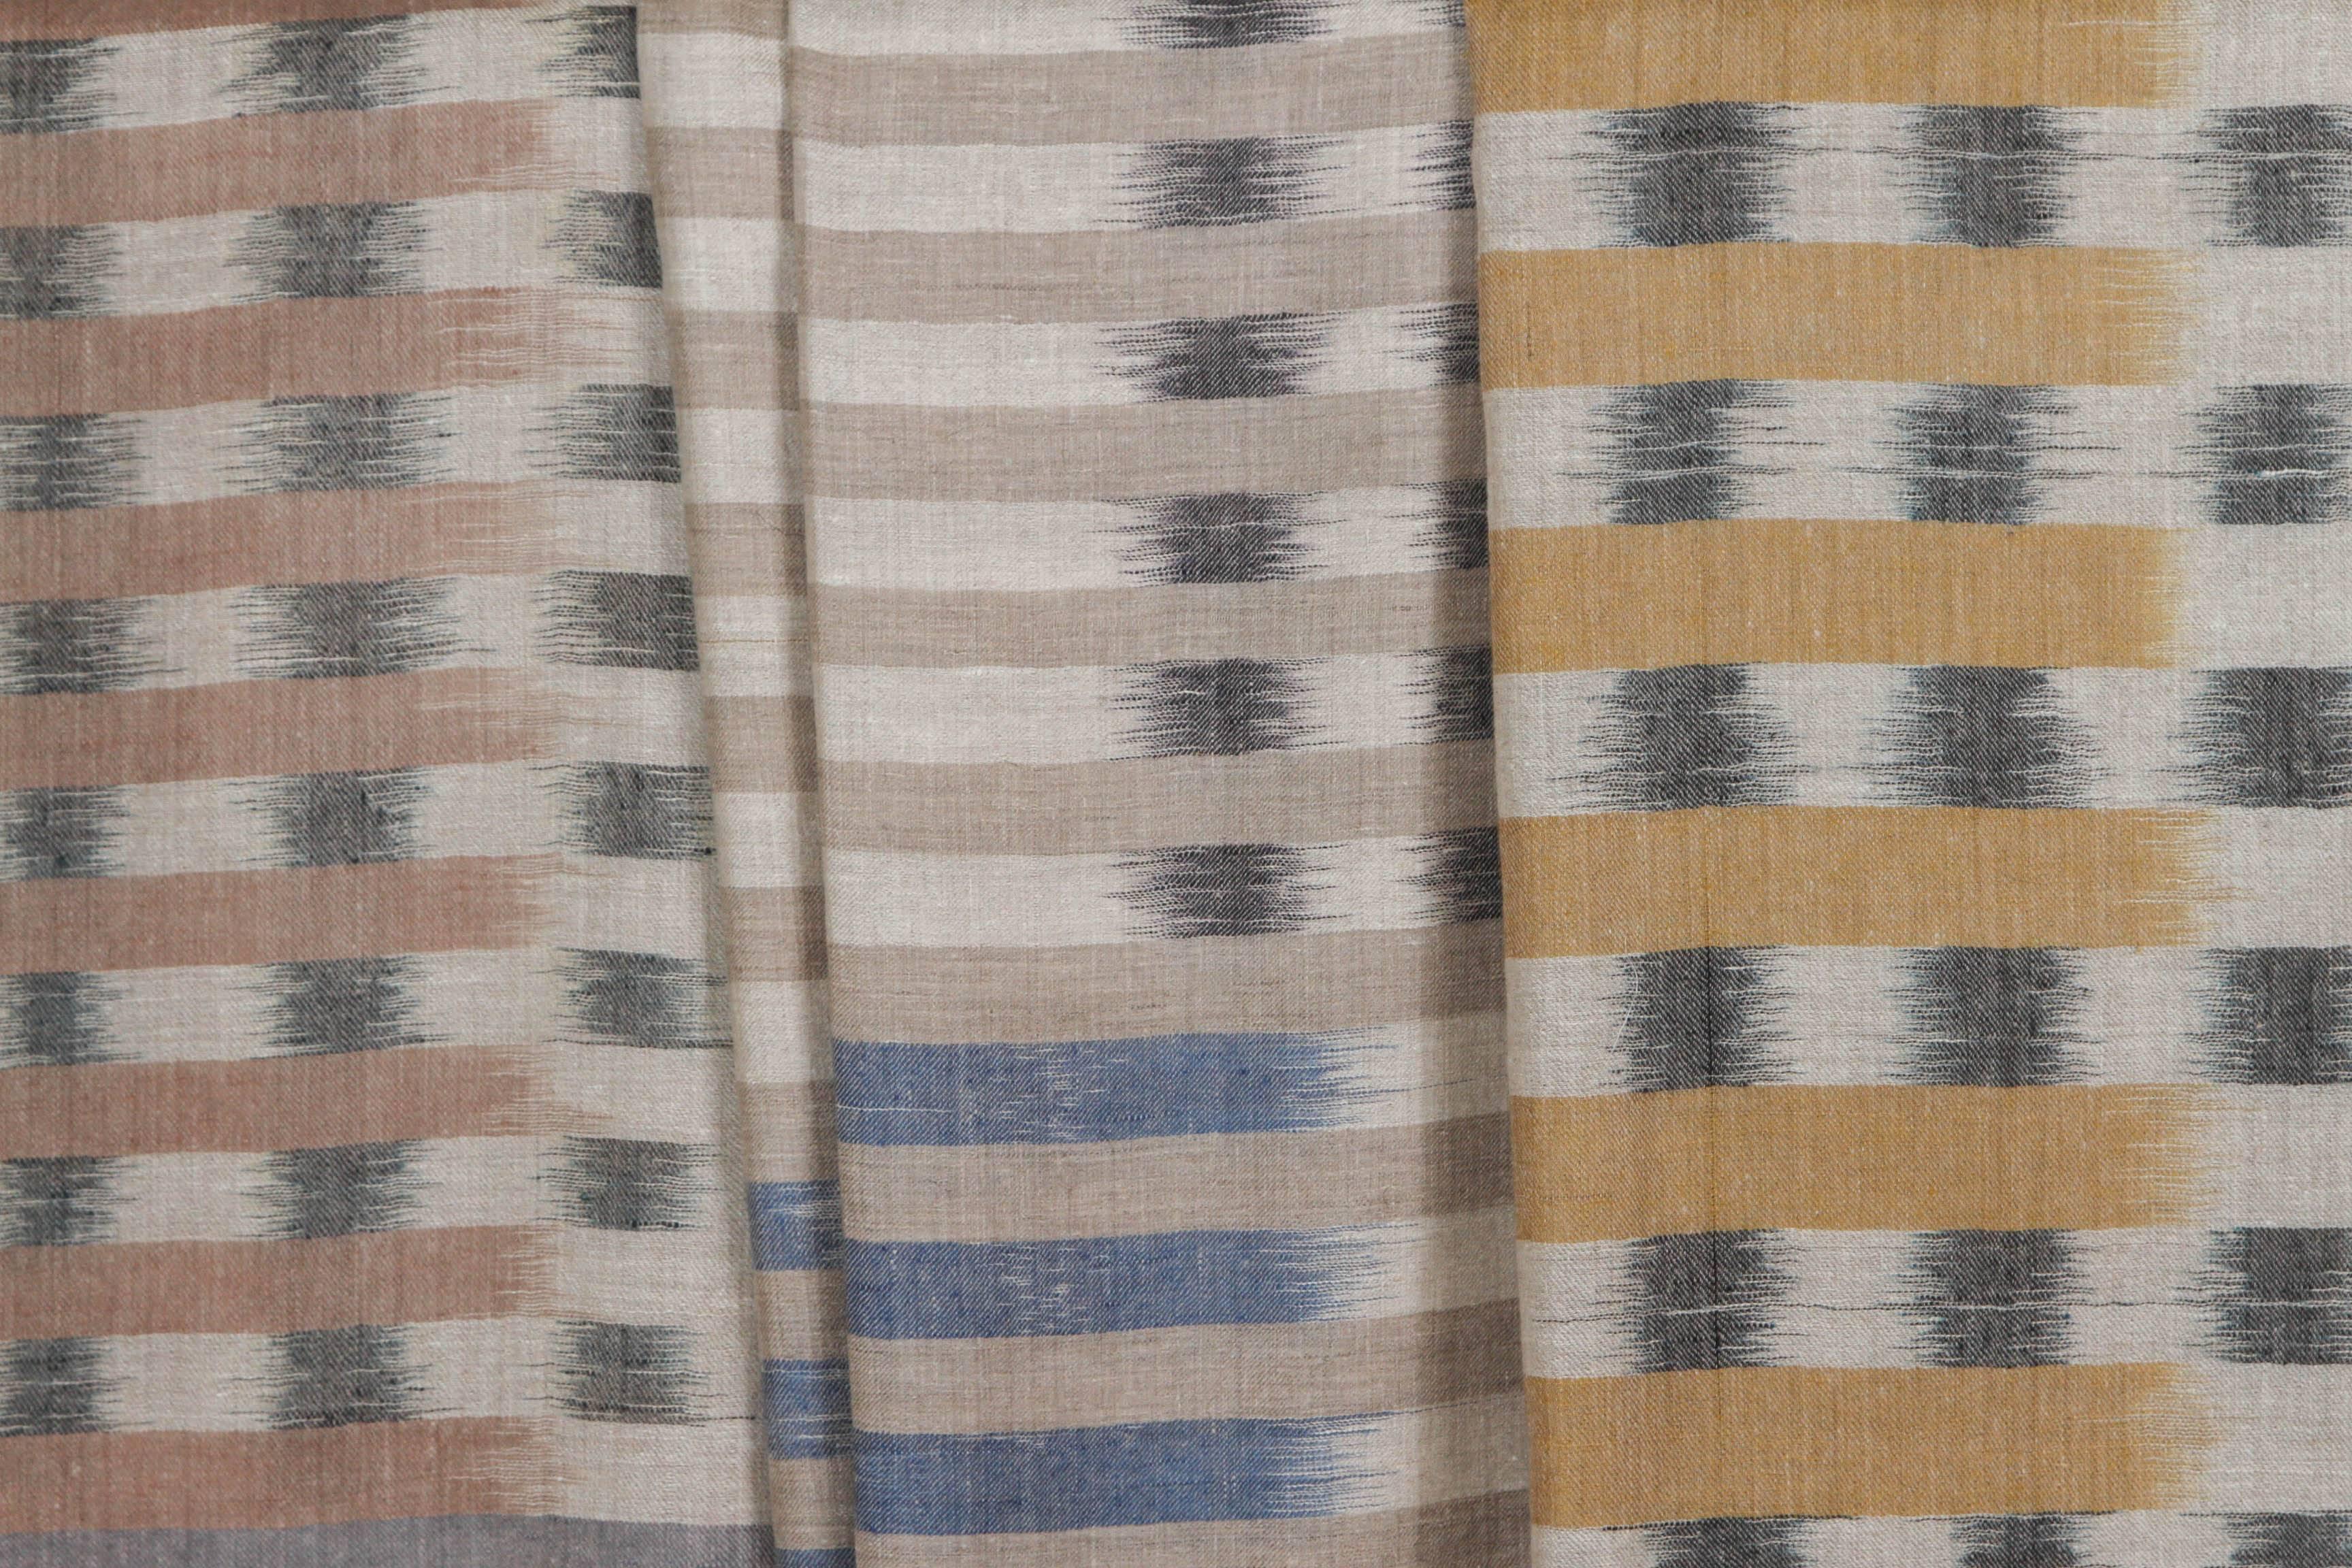 Finest quality Kahmiri Indian cashmere. Three color ways: Left: Cafe au lait, charcoal and natural ivory. Middle: Blue, charcoal, light gray and natural ivory. Right: Gold, charcoal, terra cotta and natural ivory.